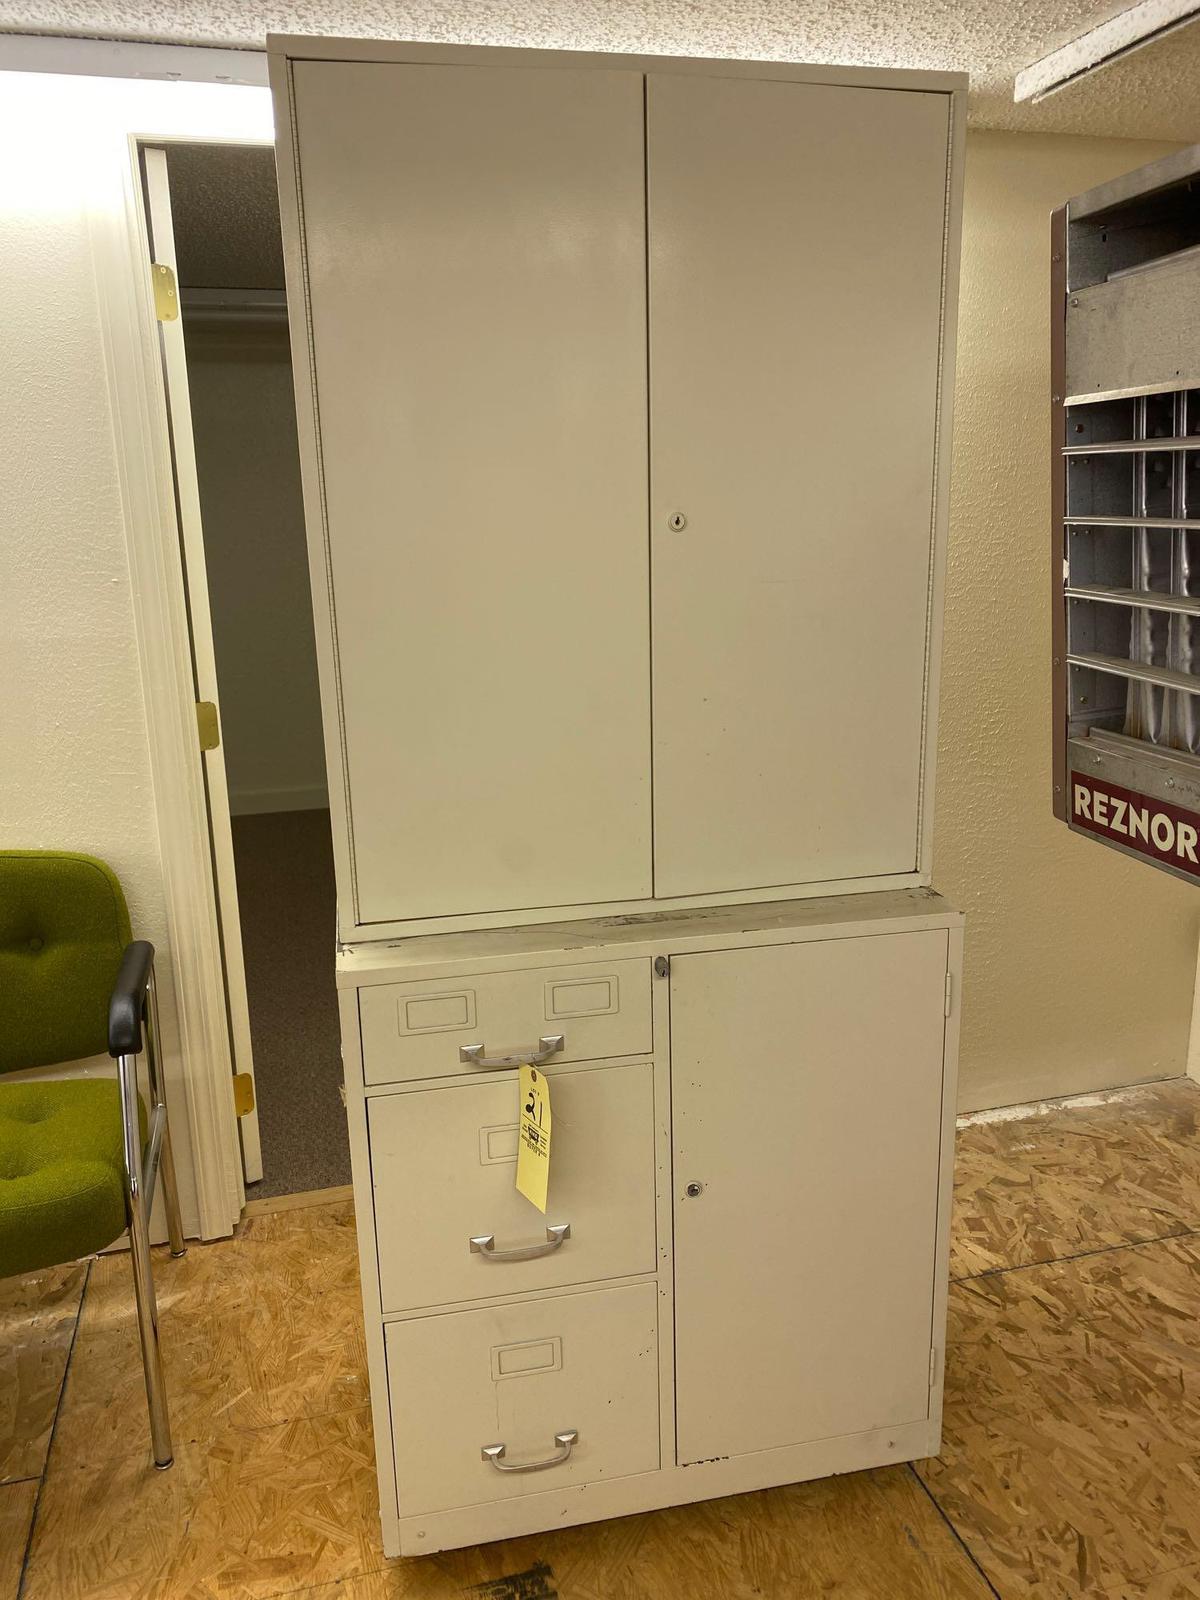 2-Pc. Metal cabinet, 72" tall x 30.5" wide, on wheels.